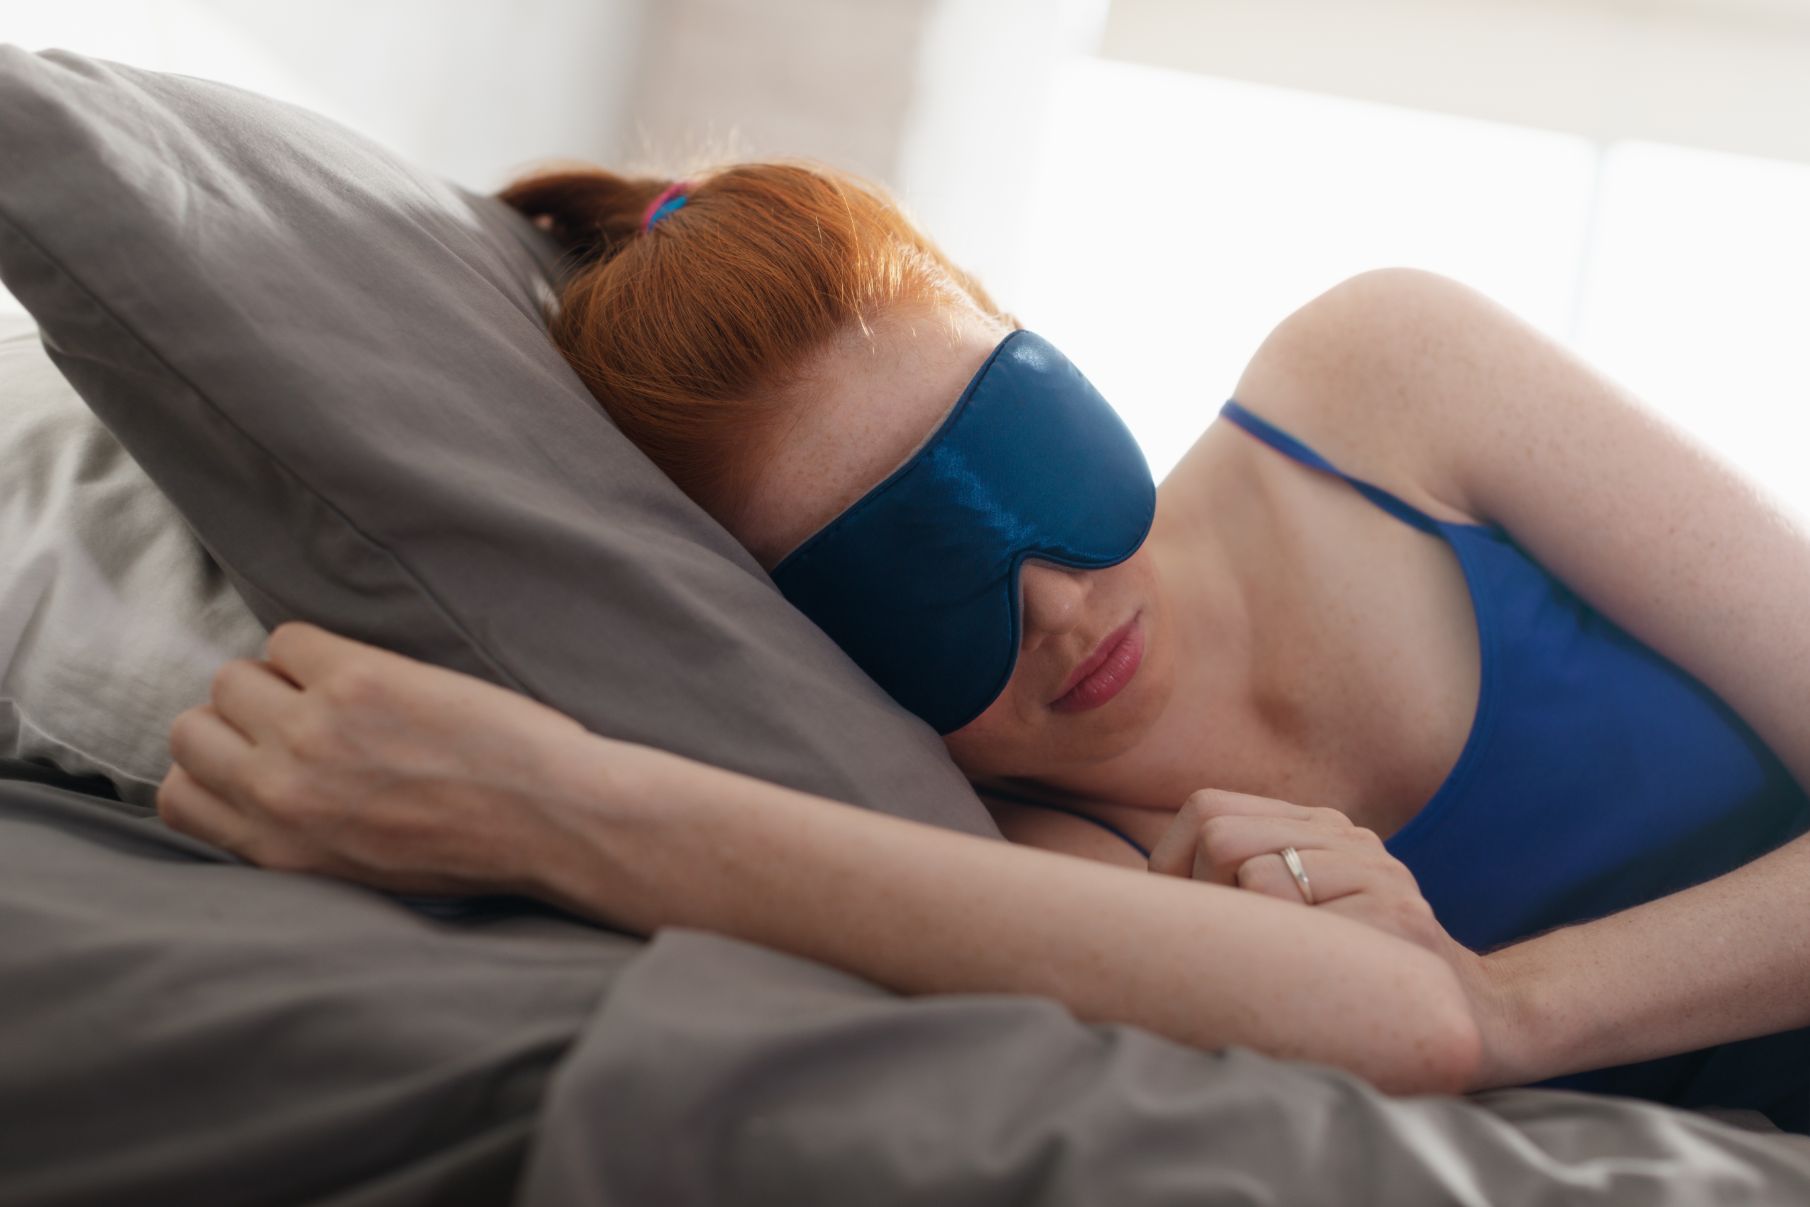 Tackling Sleep Apnea in Athletes: Why It Matters More than You Think